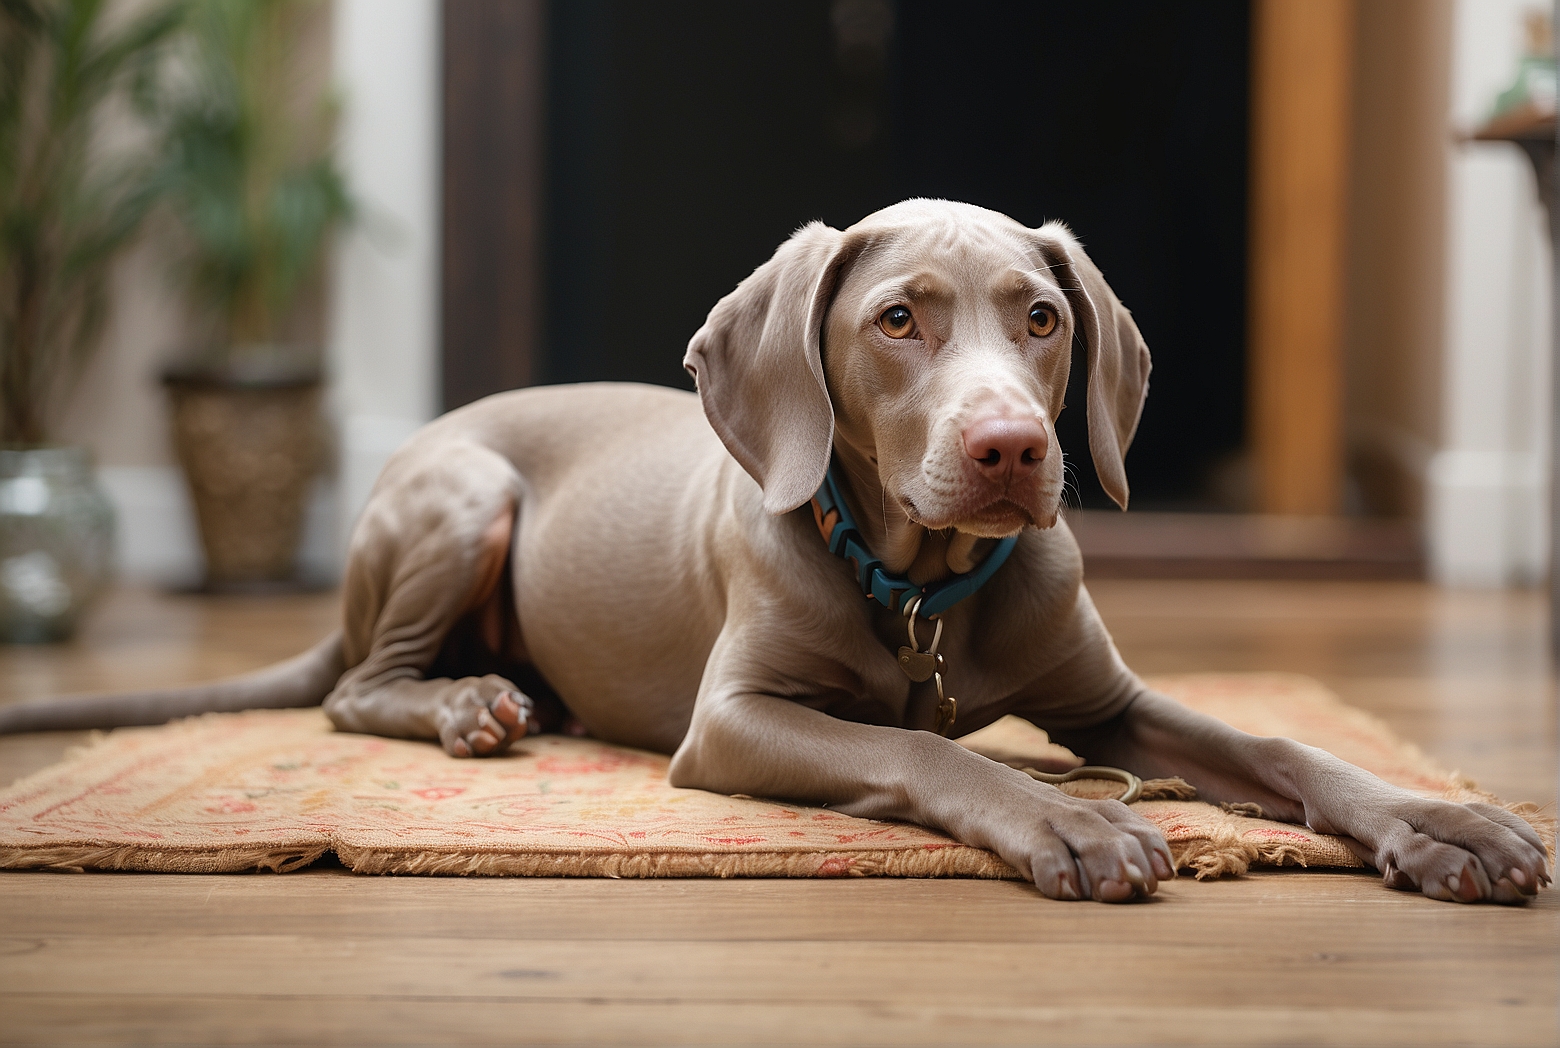 The Ultimate Guide to Finding the Best Crate for Weimaraners